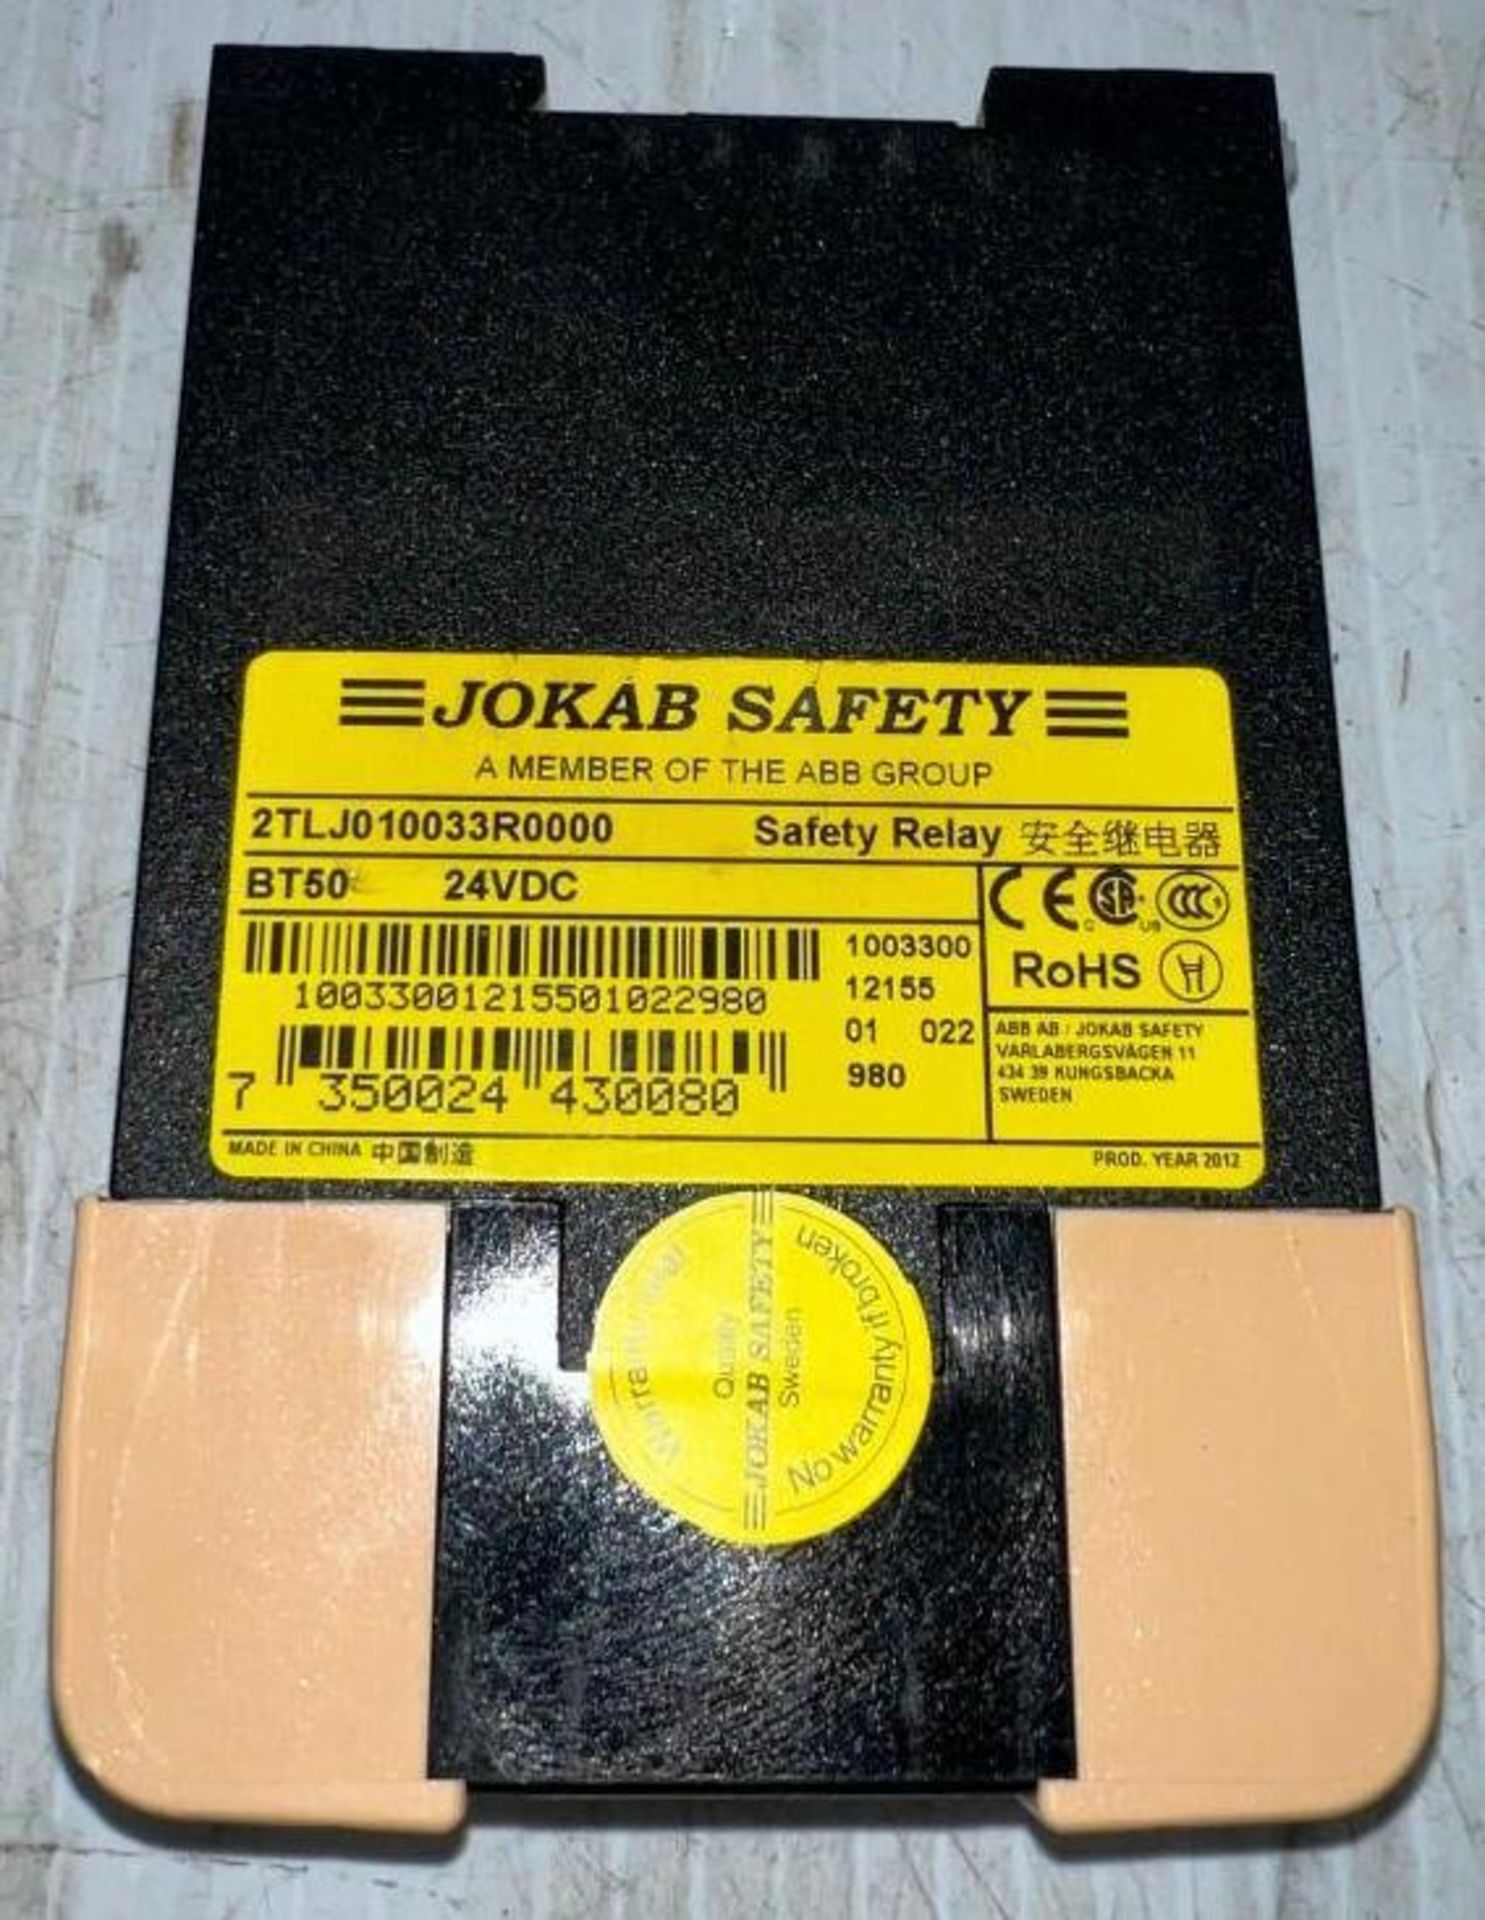 Jokab Safety / ABB #2TLJ010033R0000 Safety Relay - Image 2 of 2